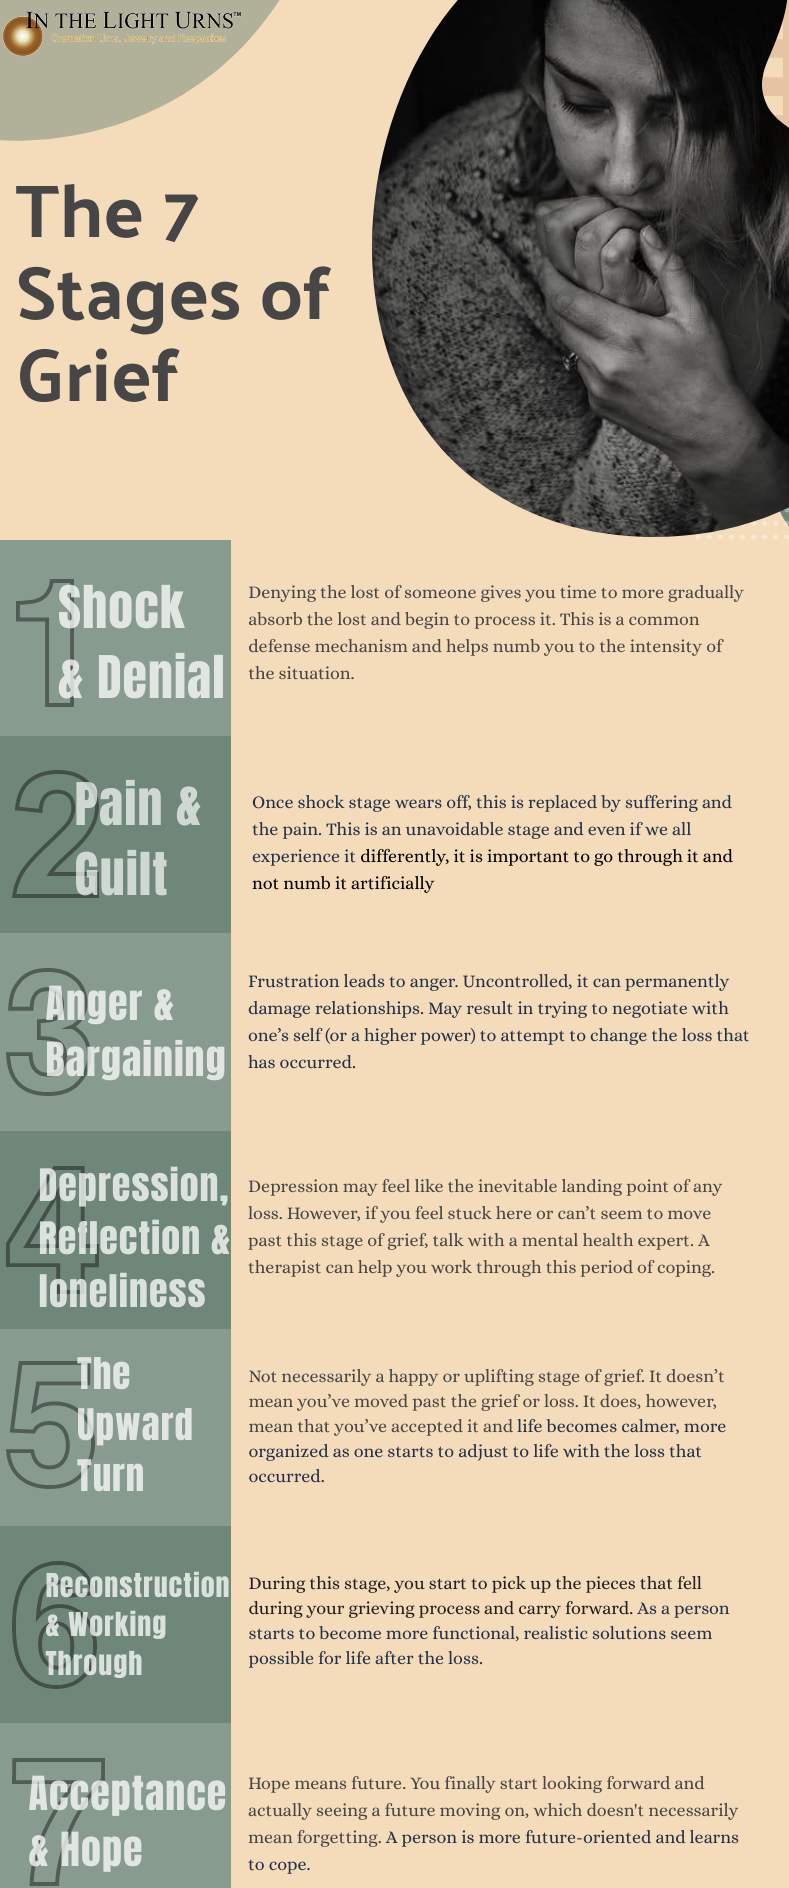 The 7 stages of grief infographic.